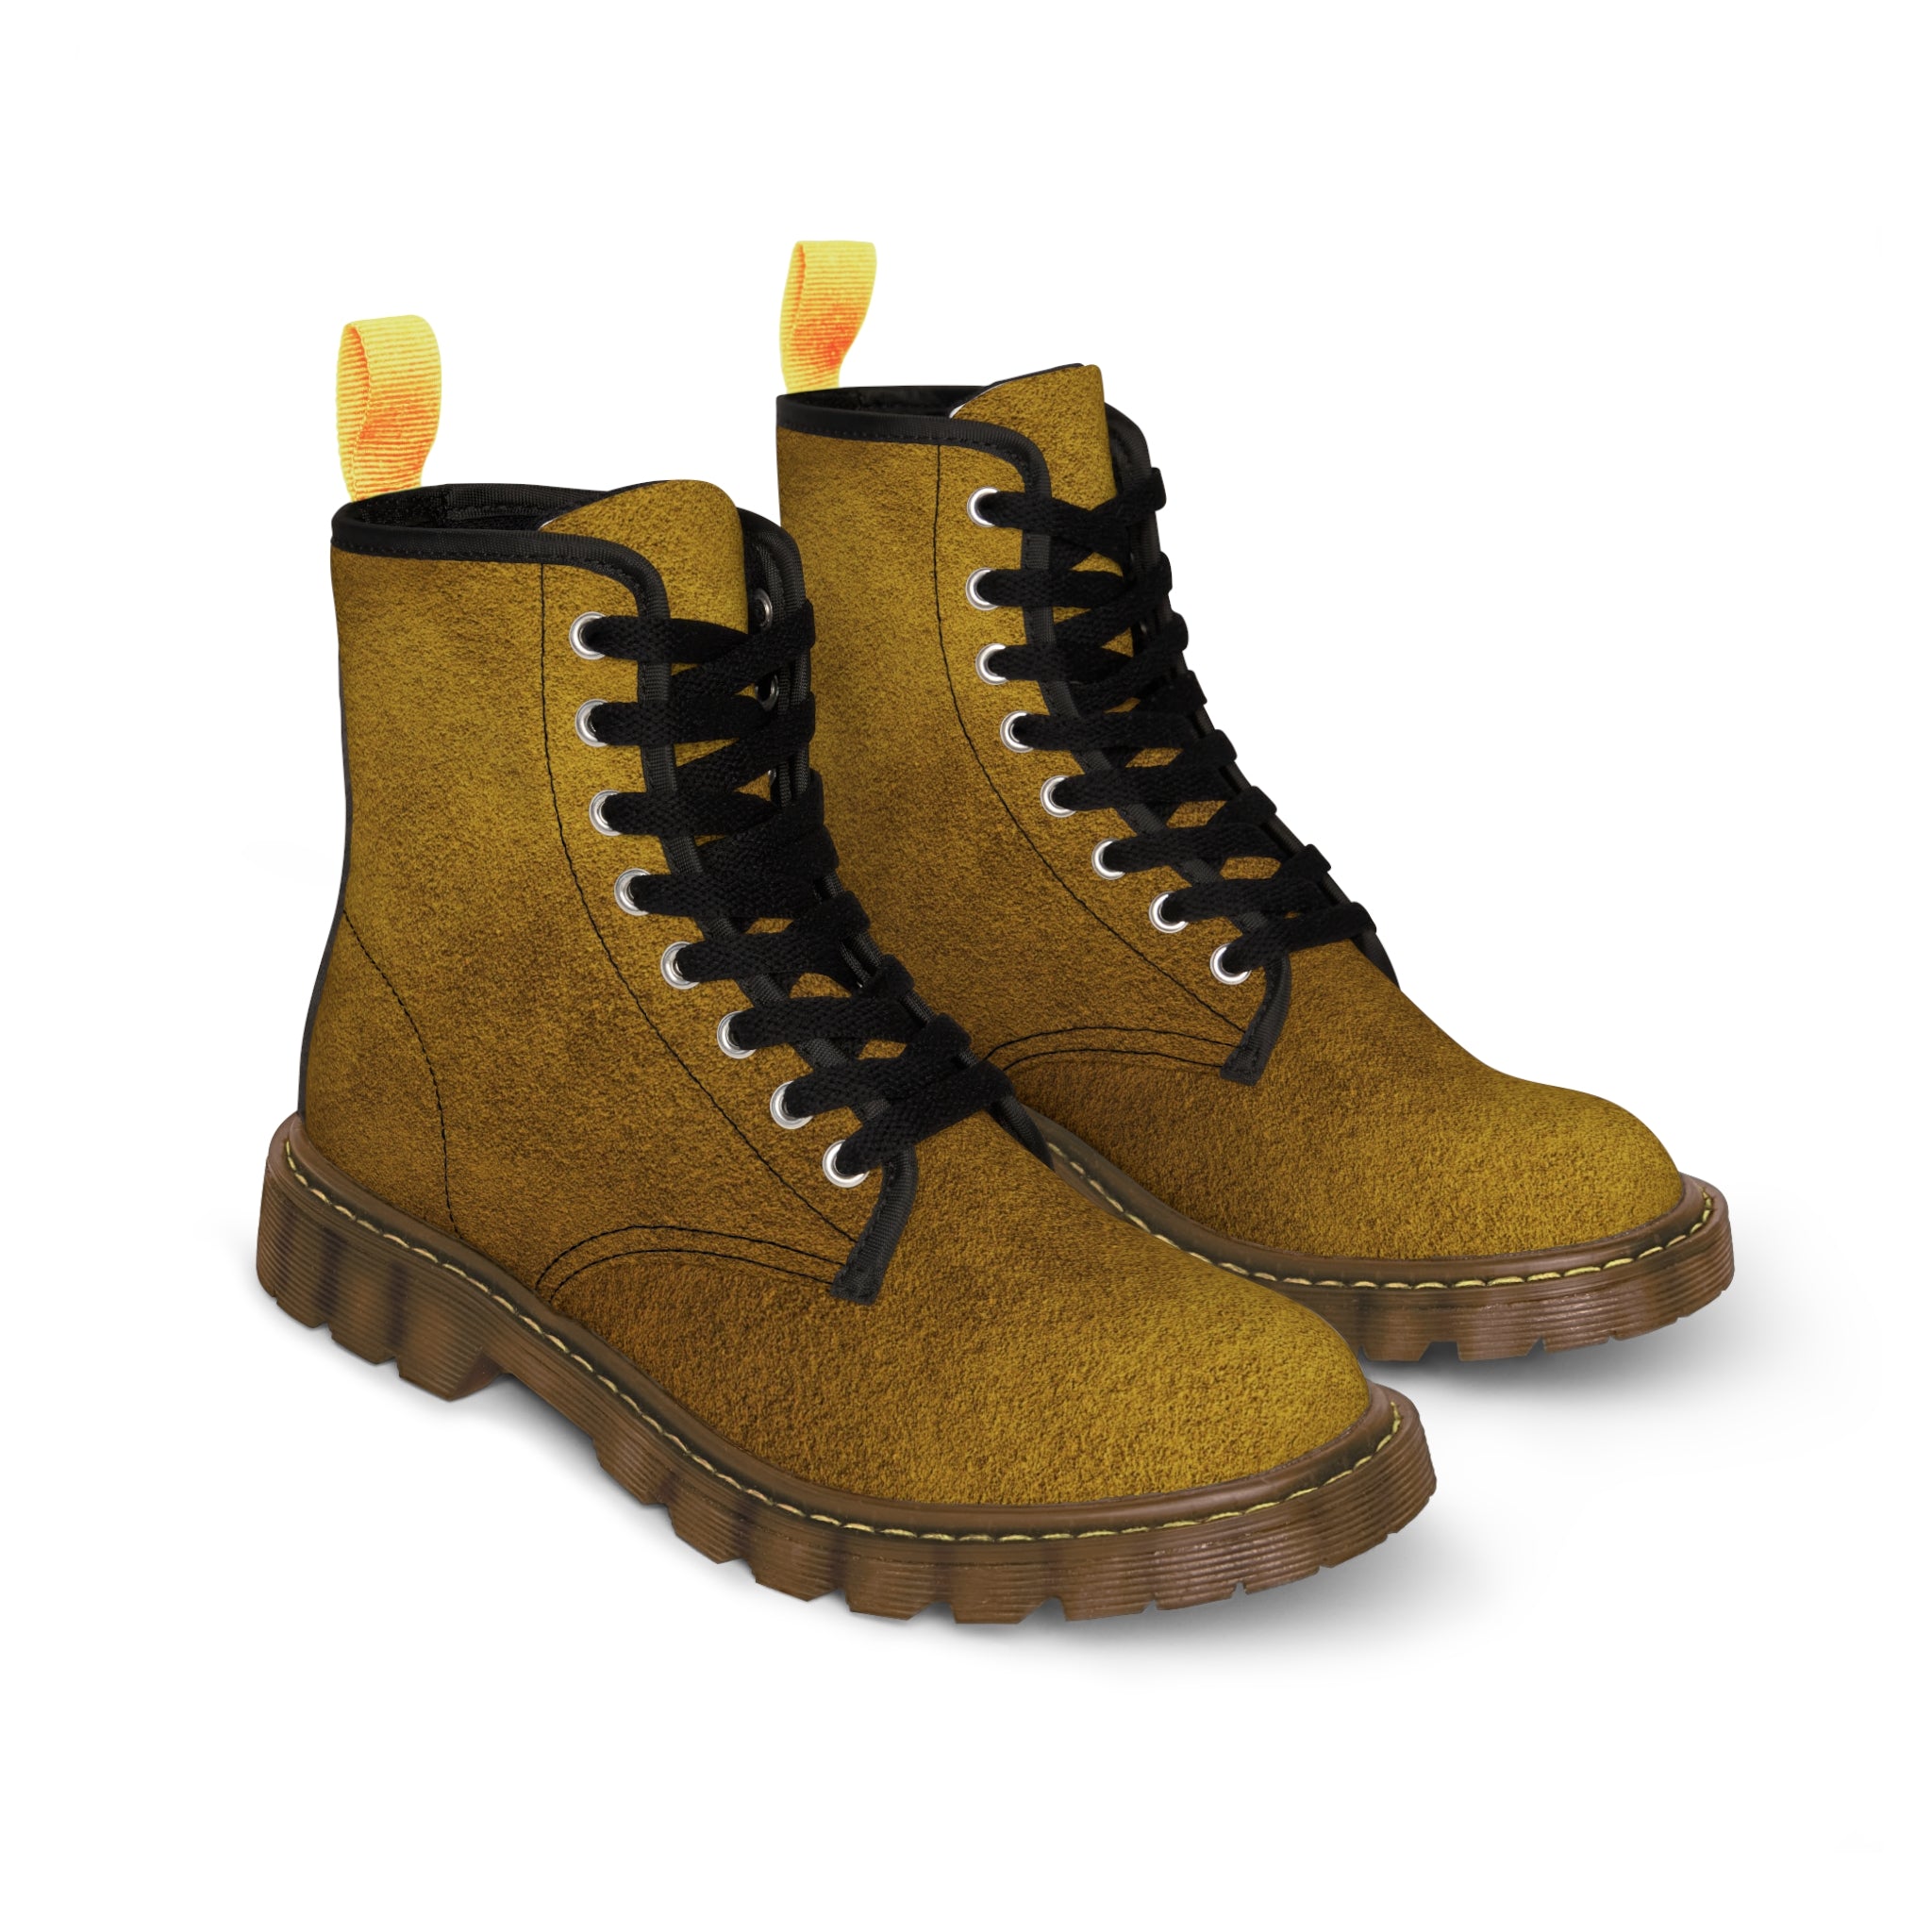 Men's Leather Look Gold Canvas Boots